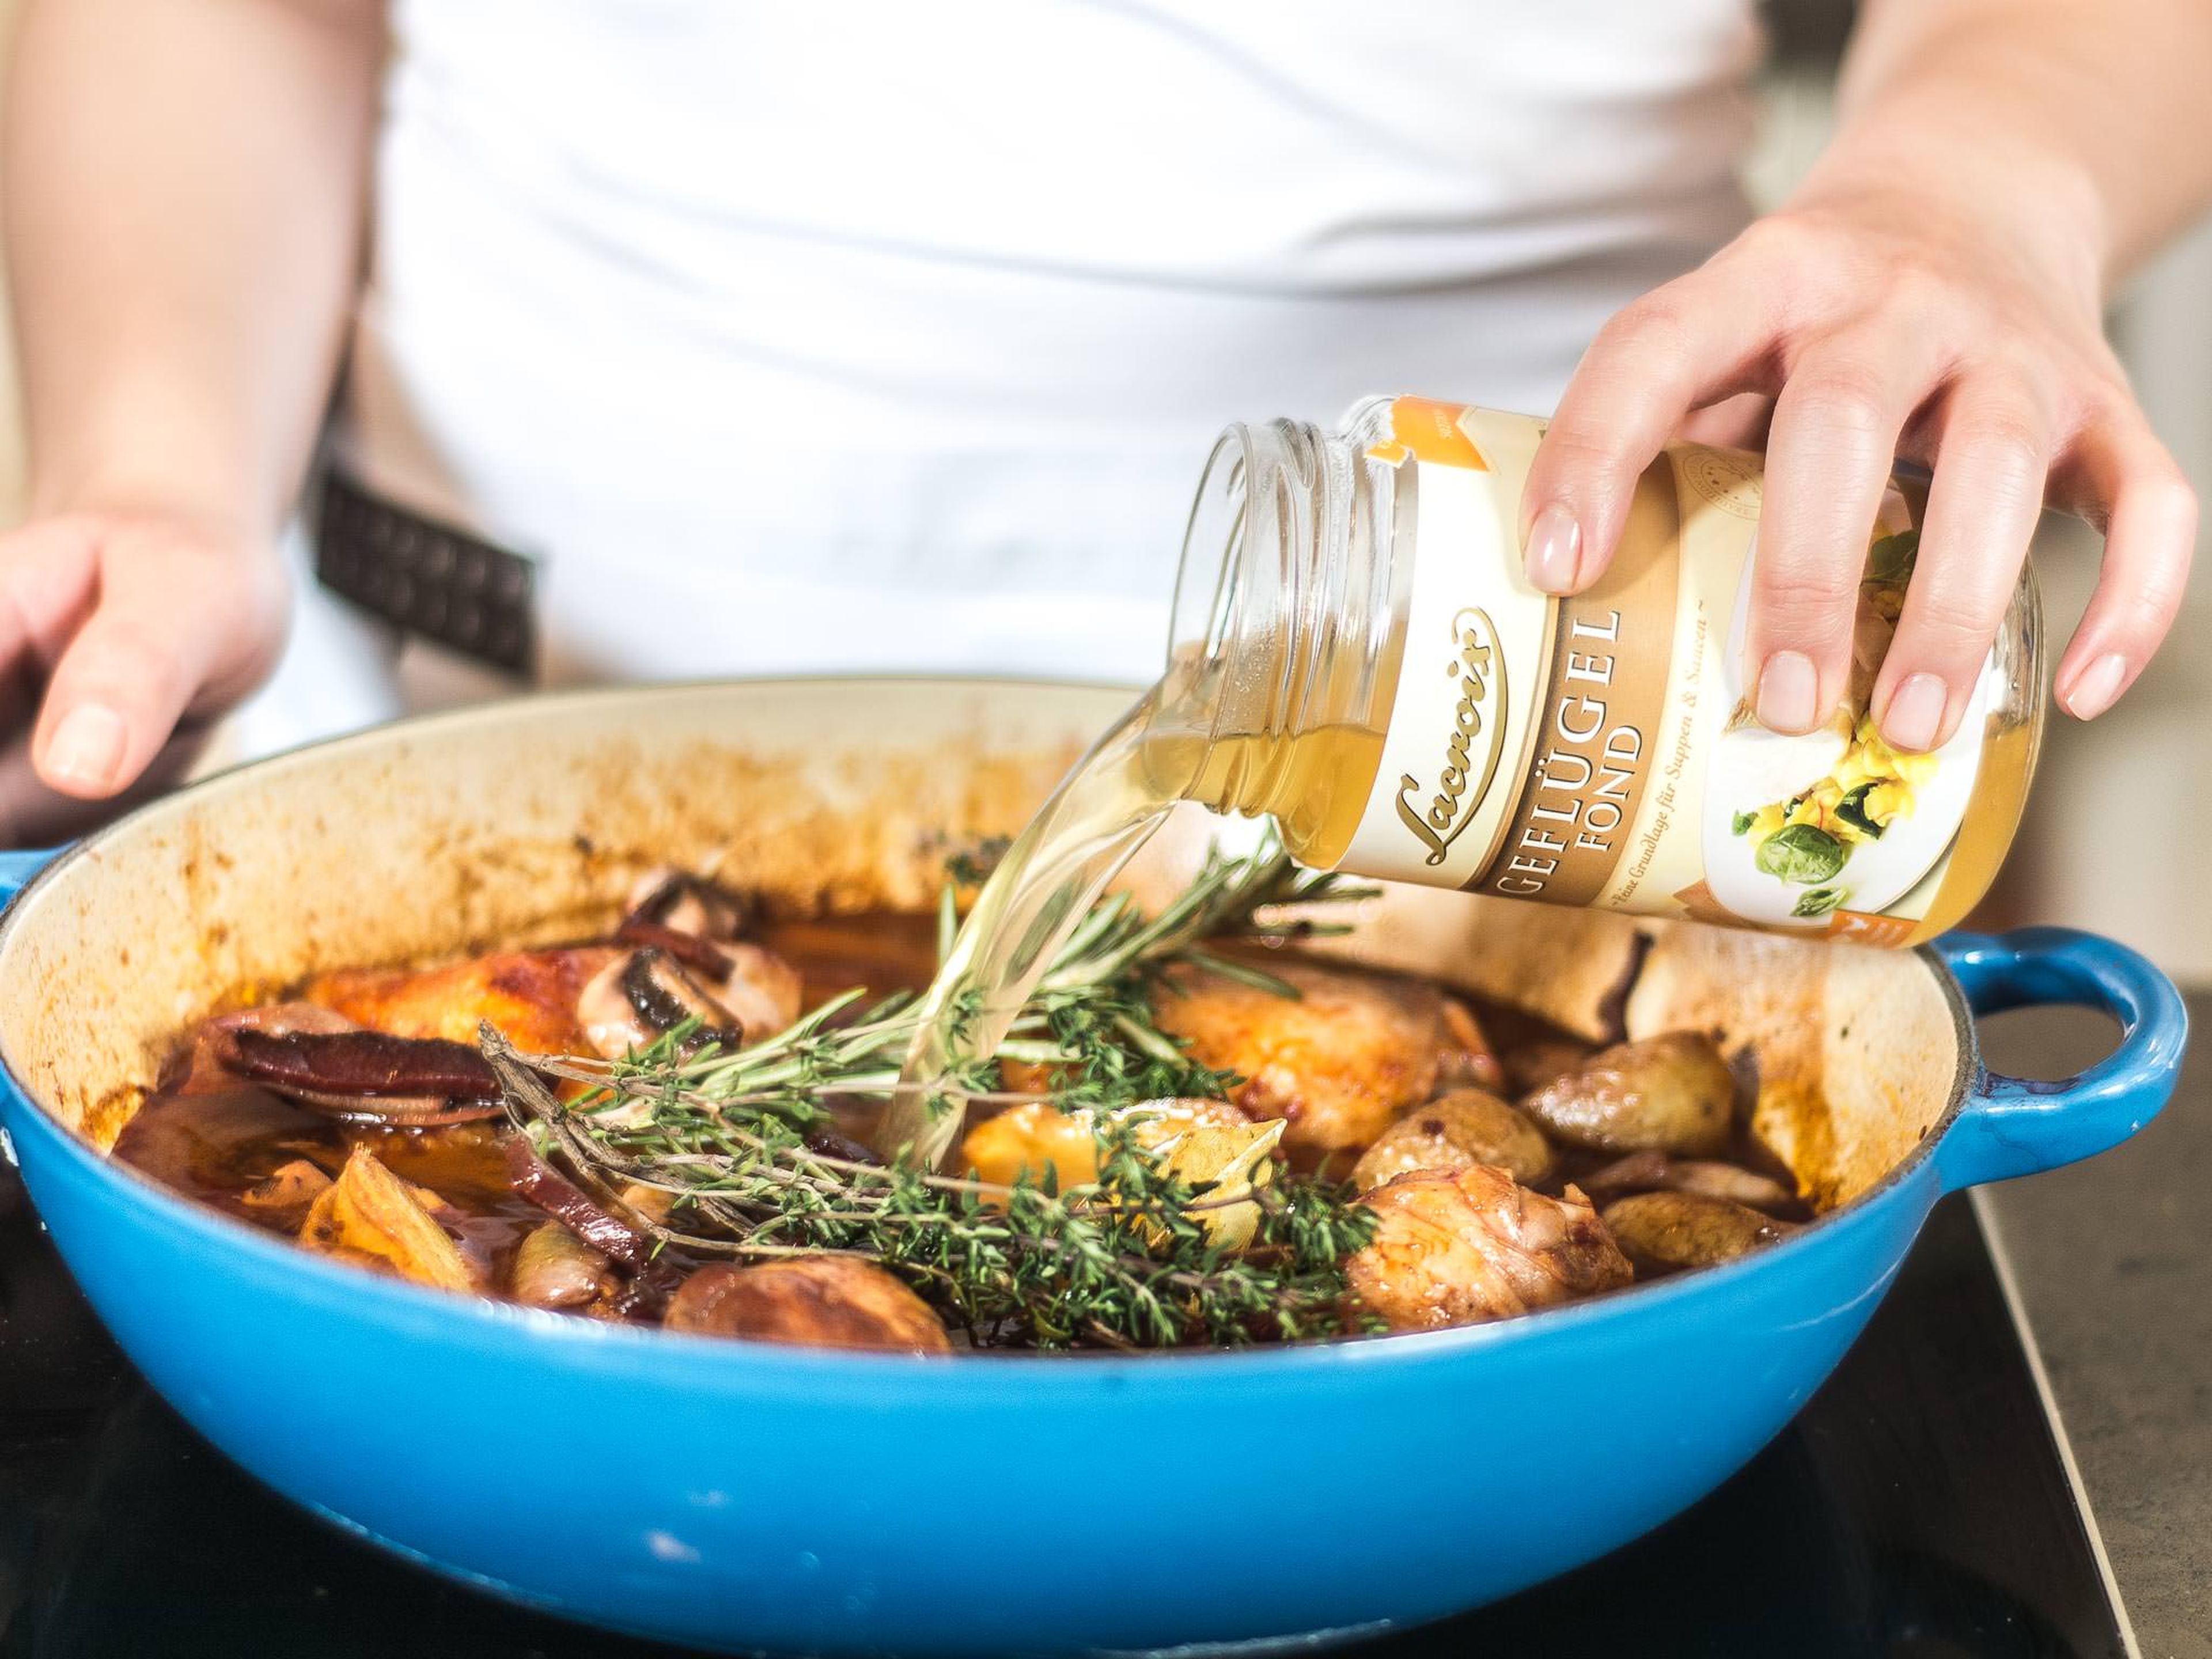 Pour in remaining red wine and chicken stock. Add bay leaf, thyme, and rosemary and let simmer for approx. 30 – 35 min. with closed lid on medium heat.